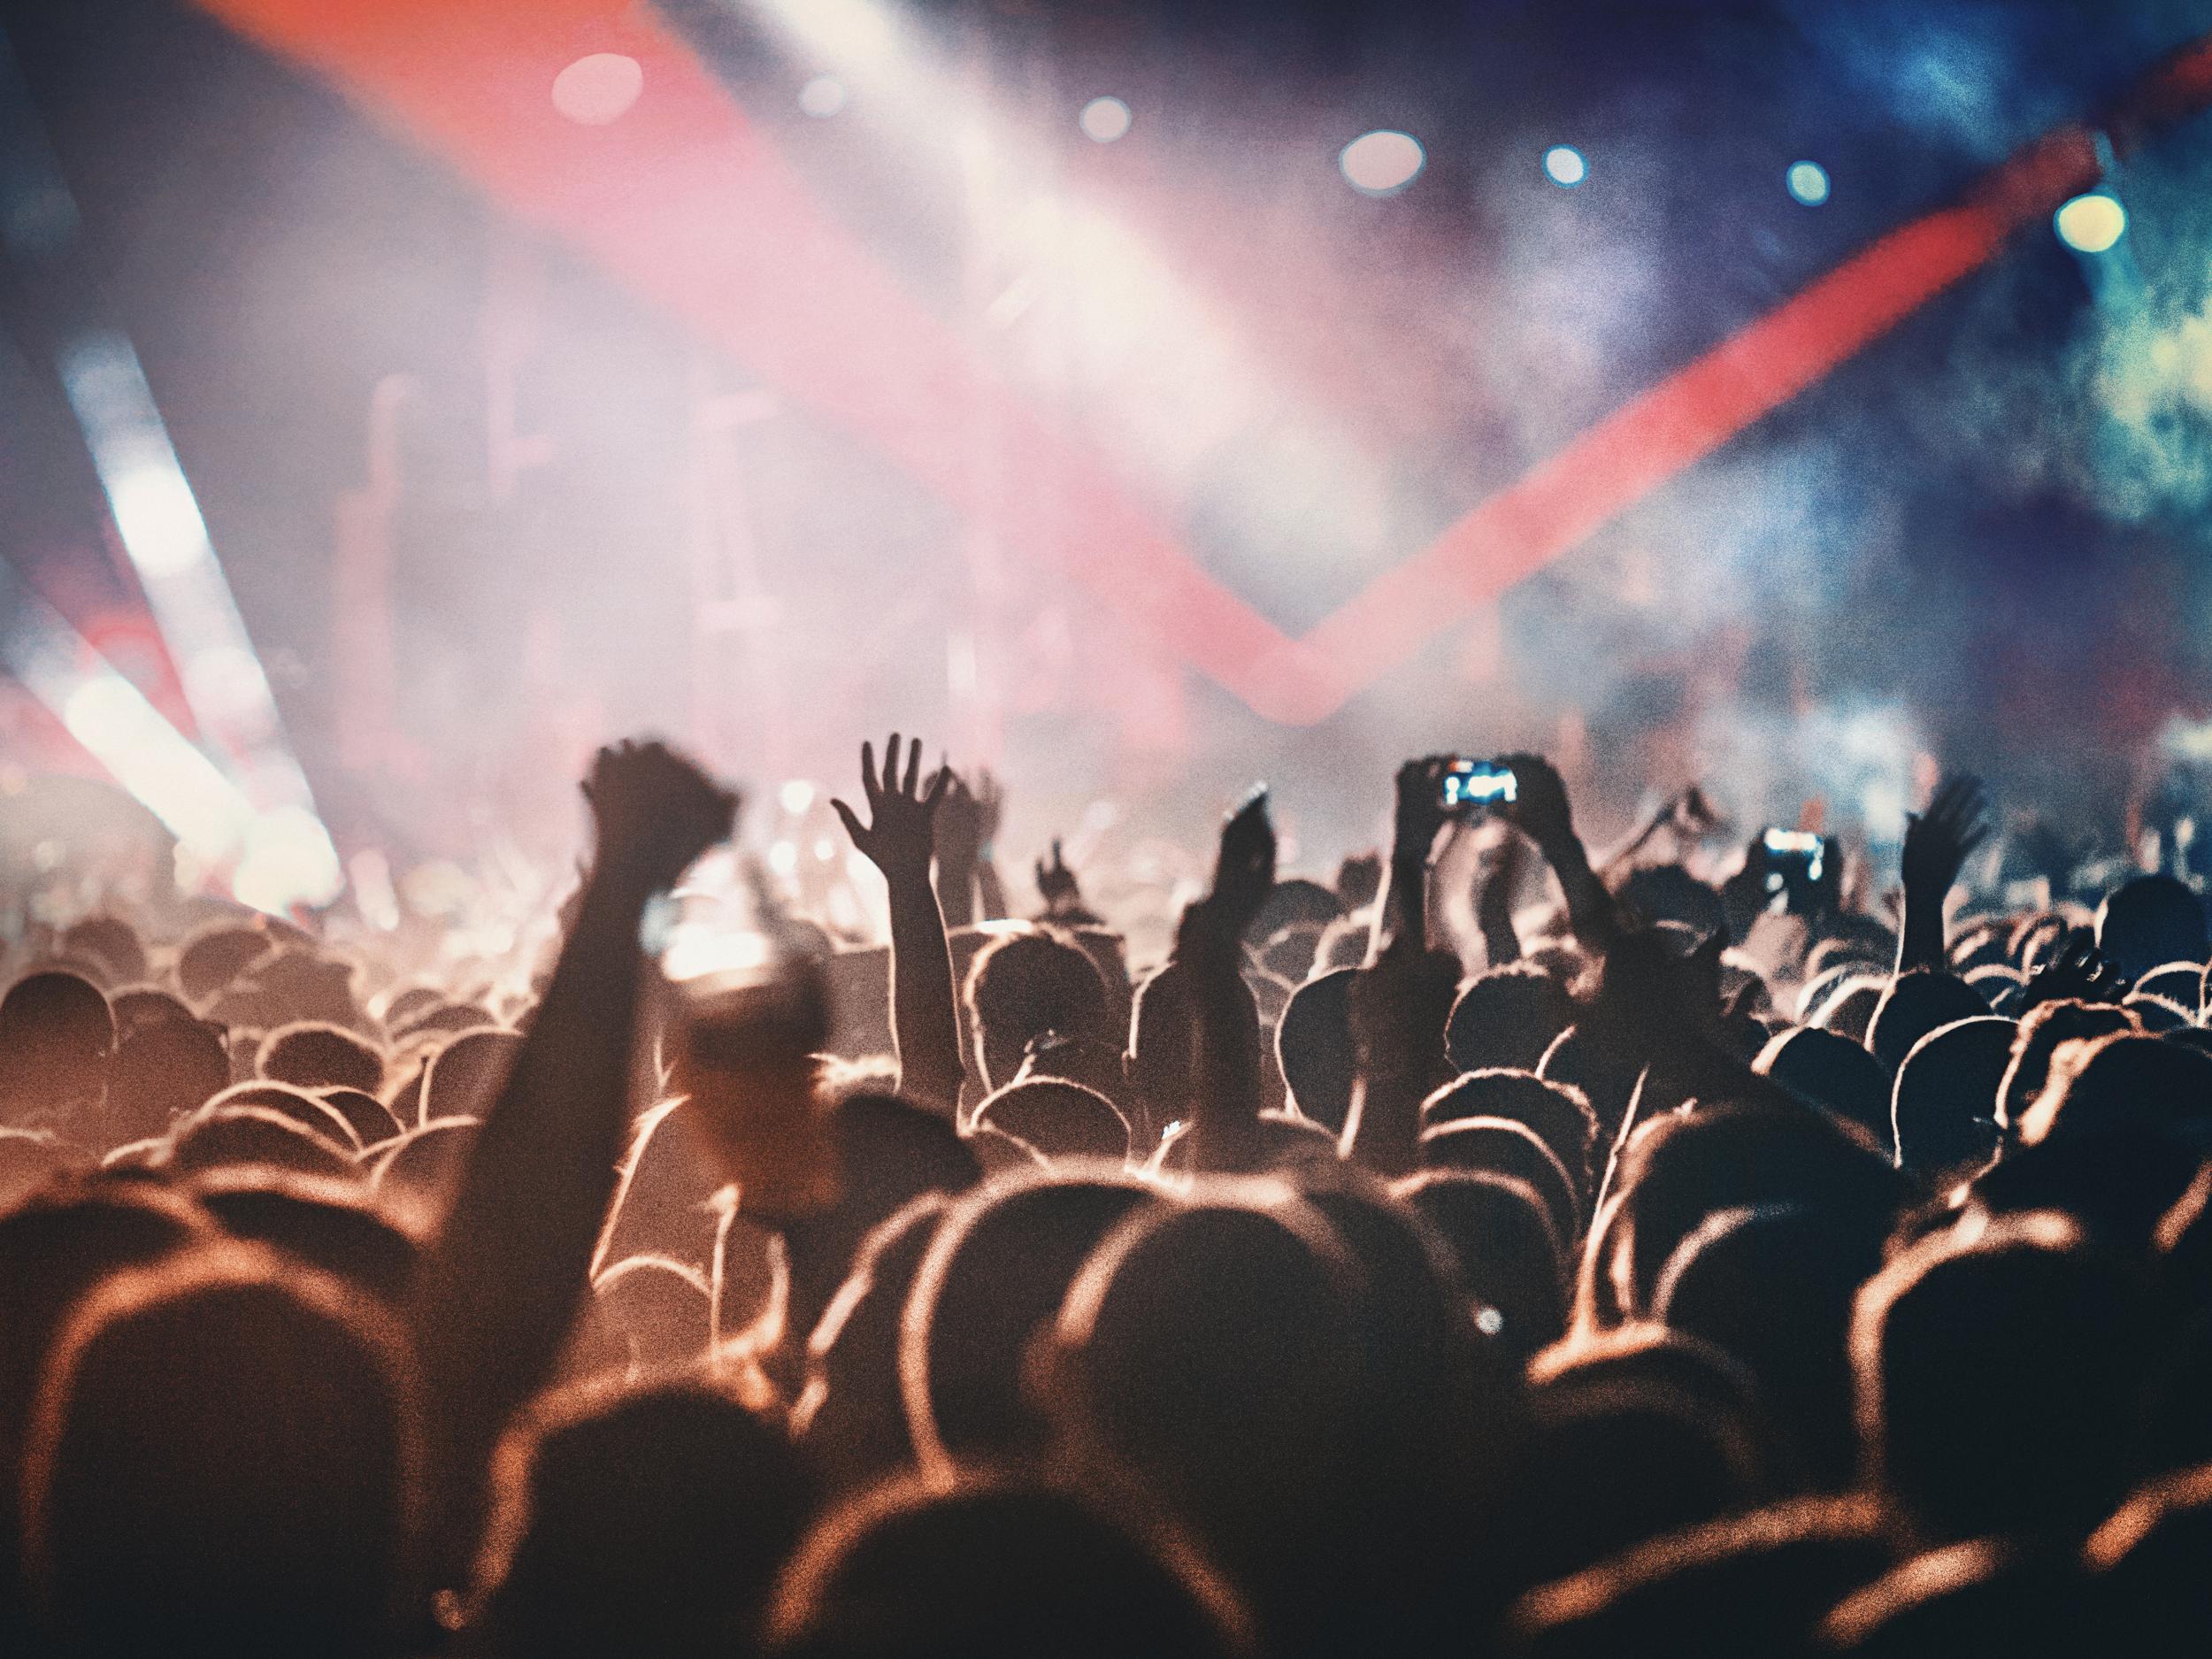 Research shows that attending concerts regularly can have a variety of health benefits